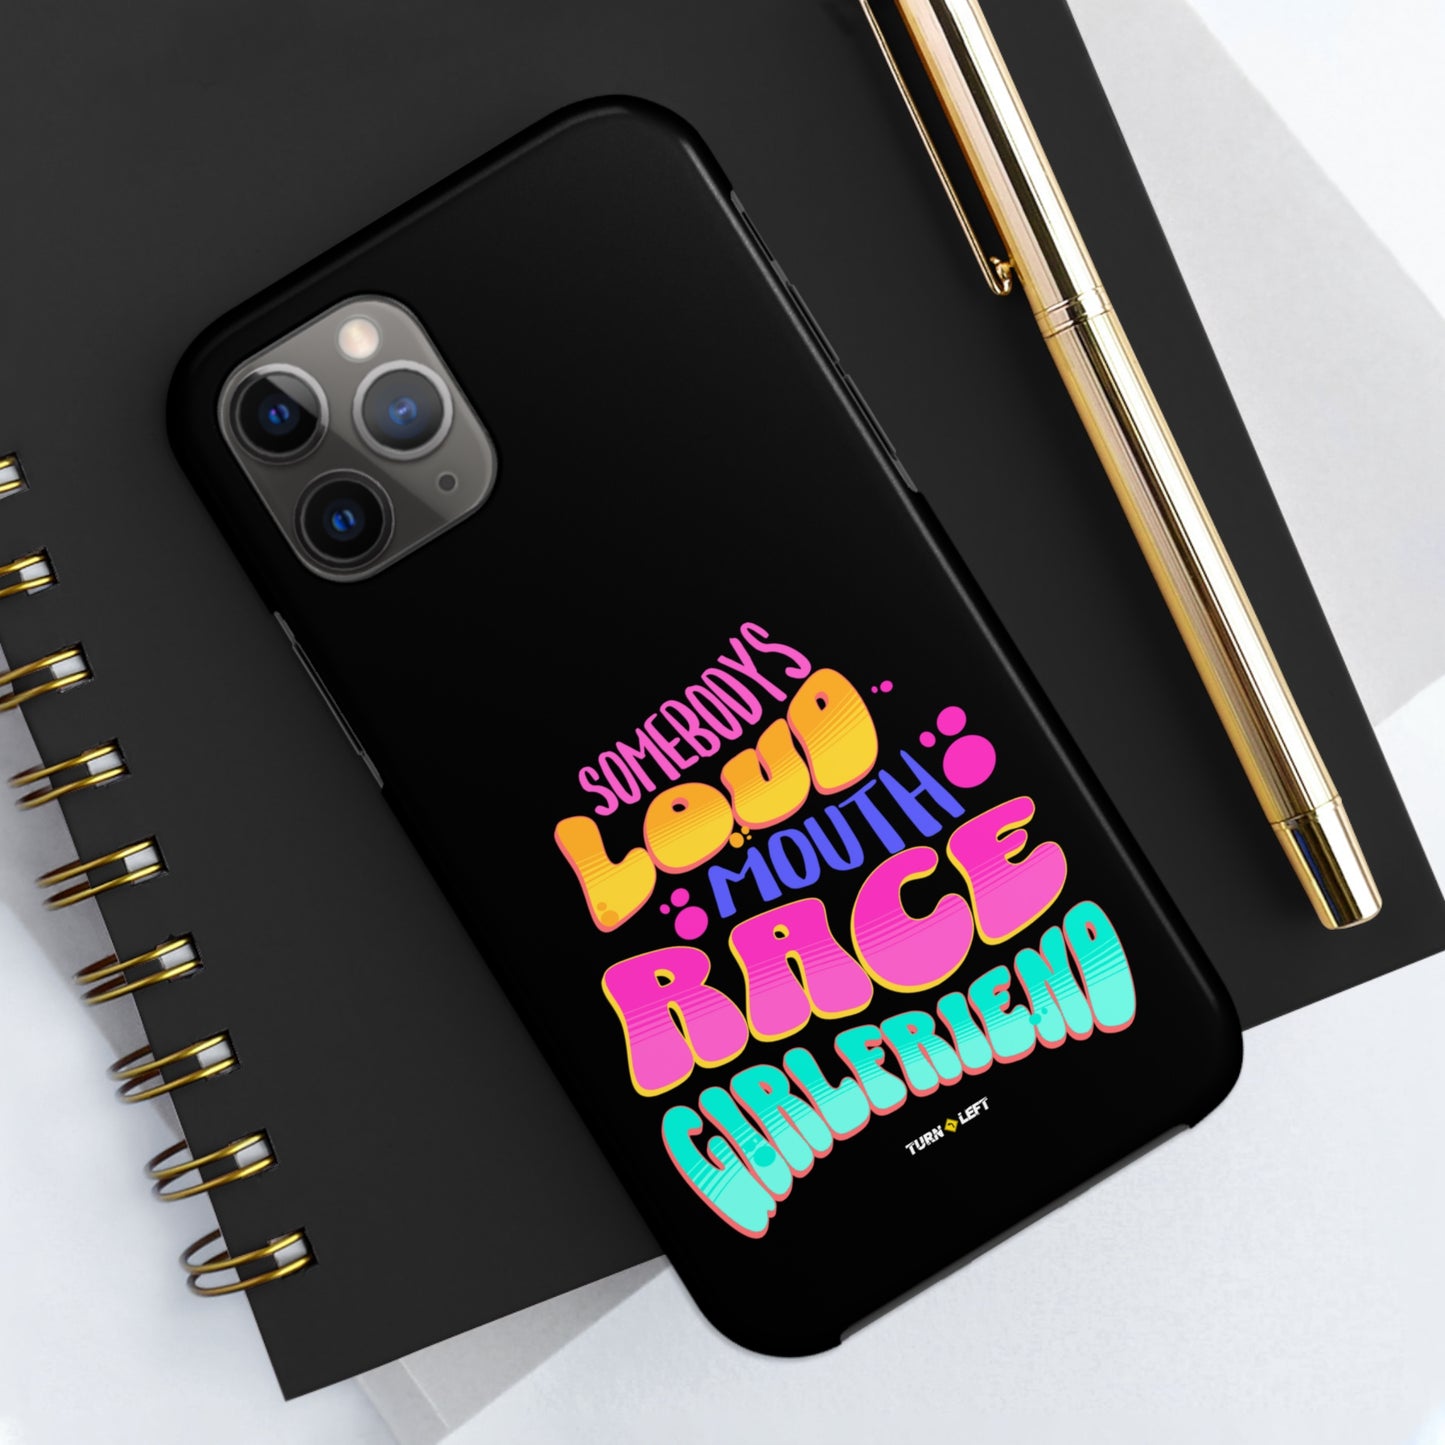 Retro Somebody's Loud Mouth Race Girlfriend Tough Phone Cases